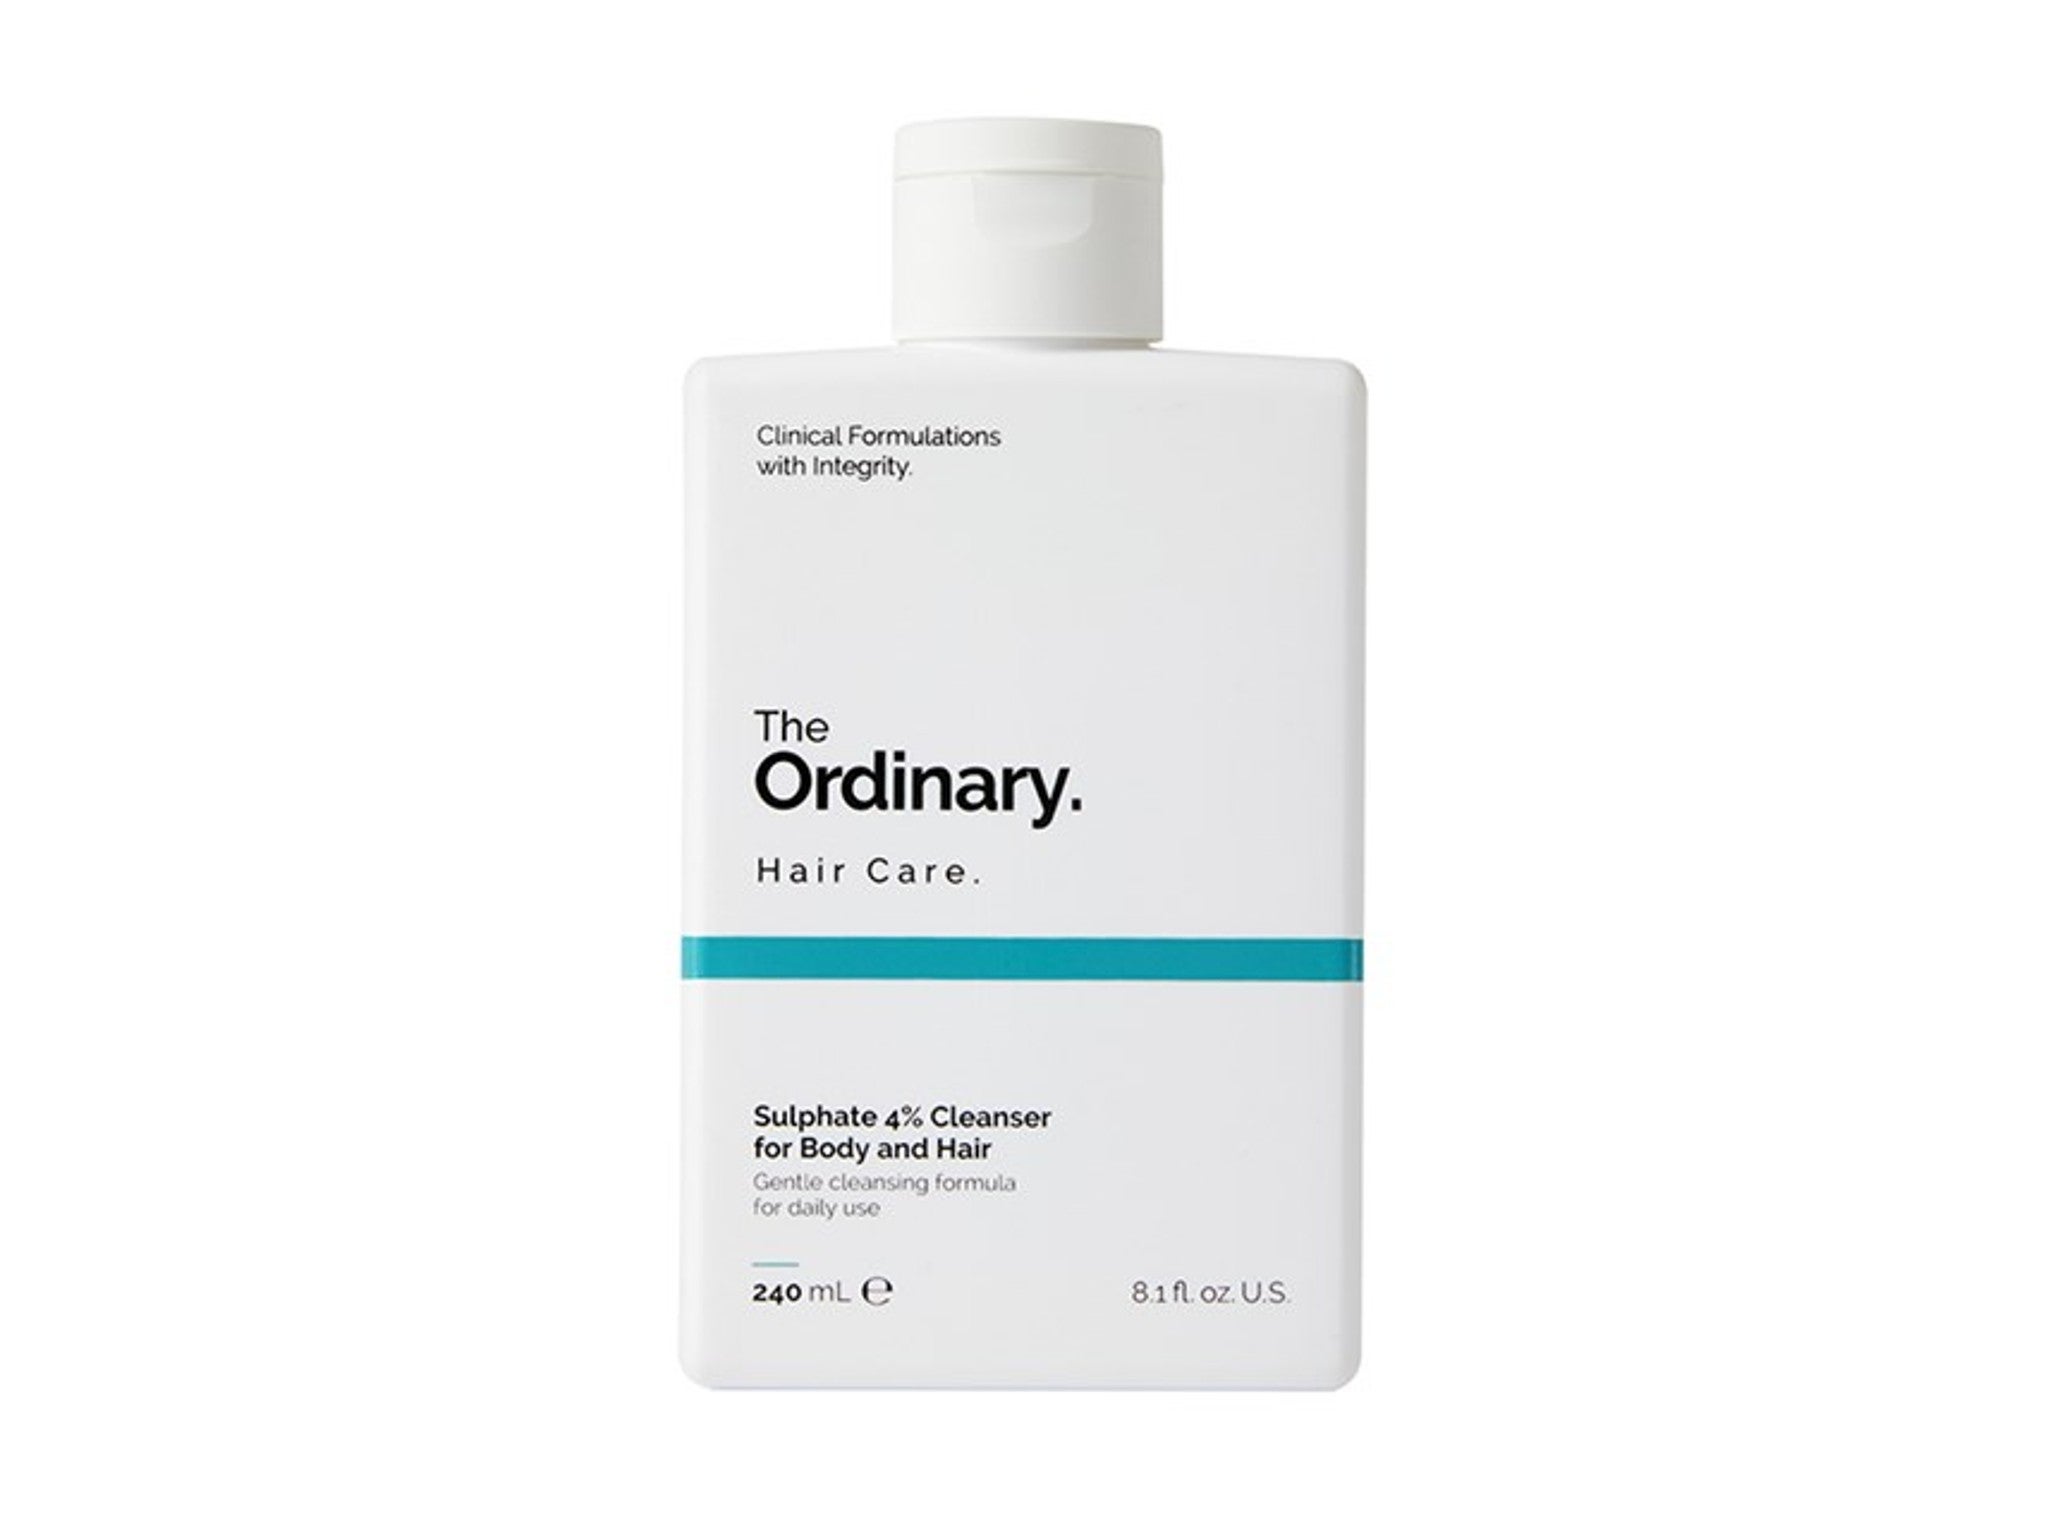 The Ordinary sulphate 4% cleanser for hair & body indybest.jpg